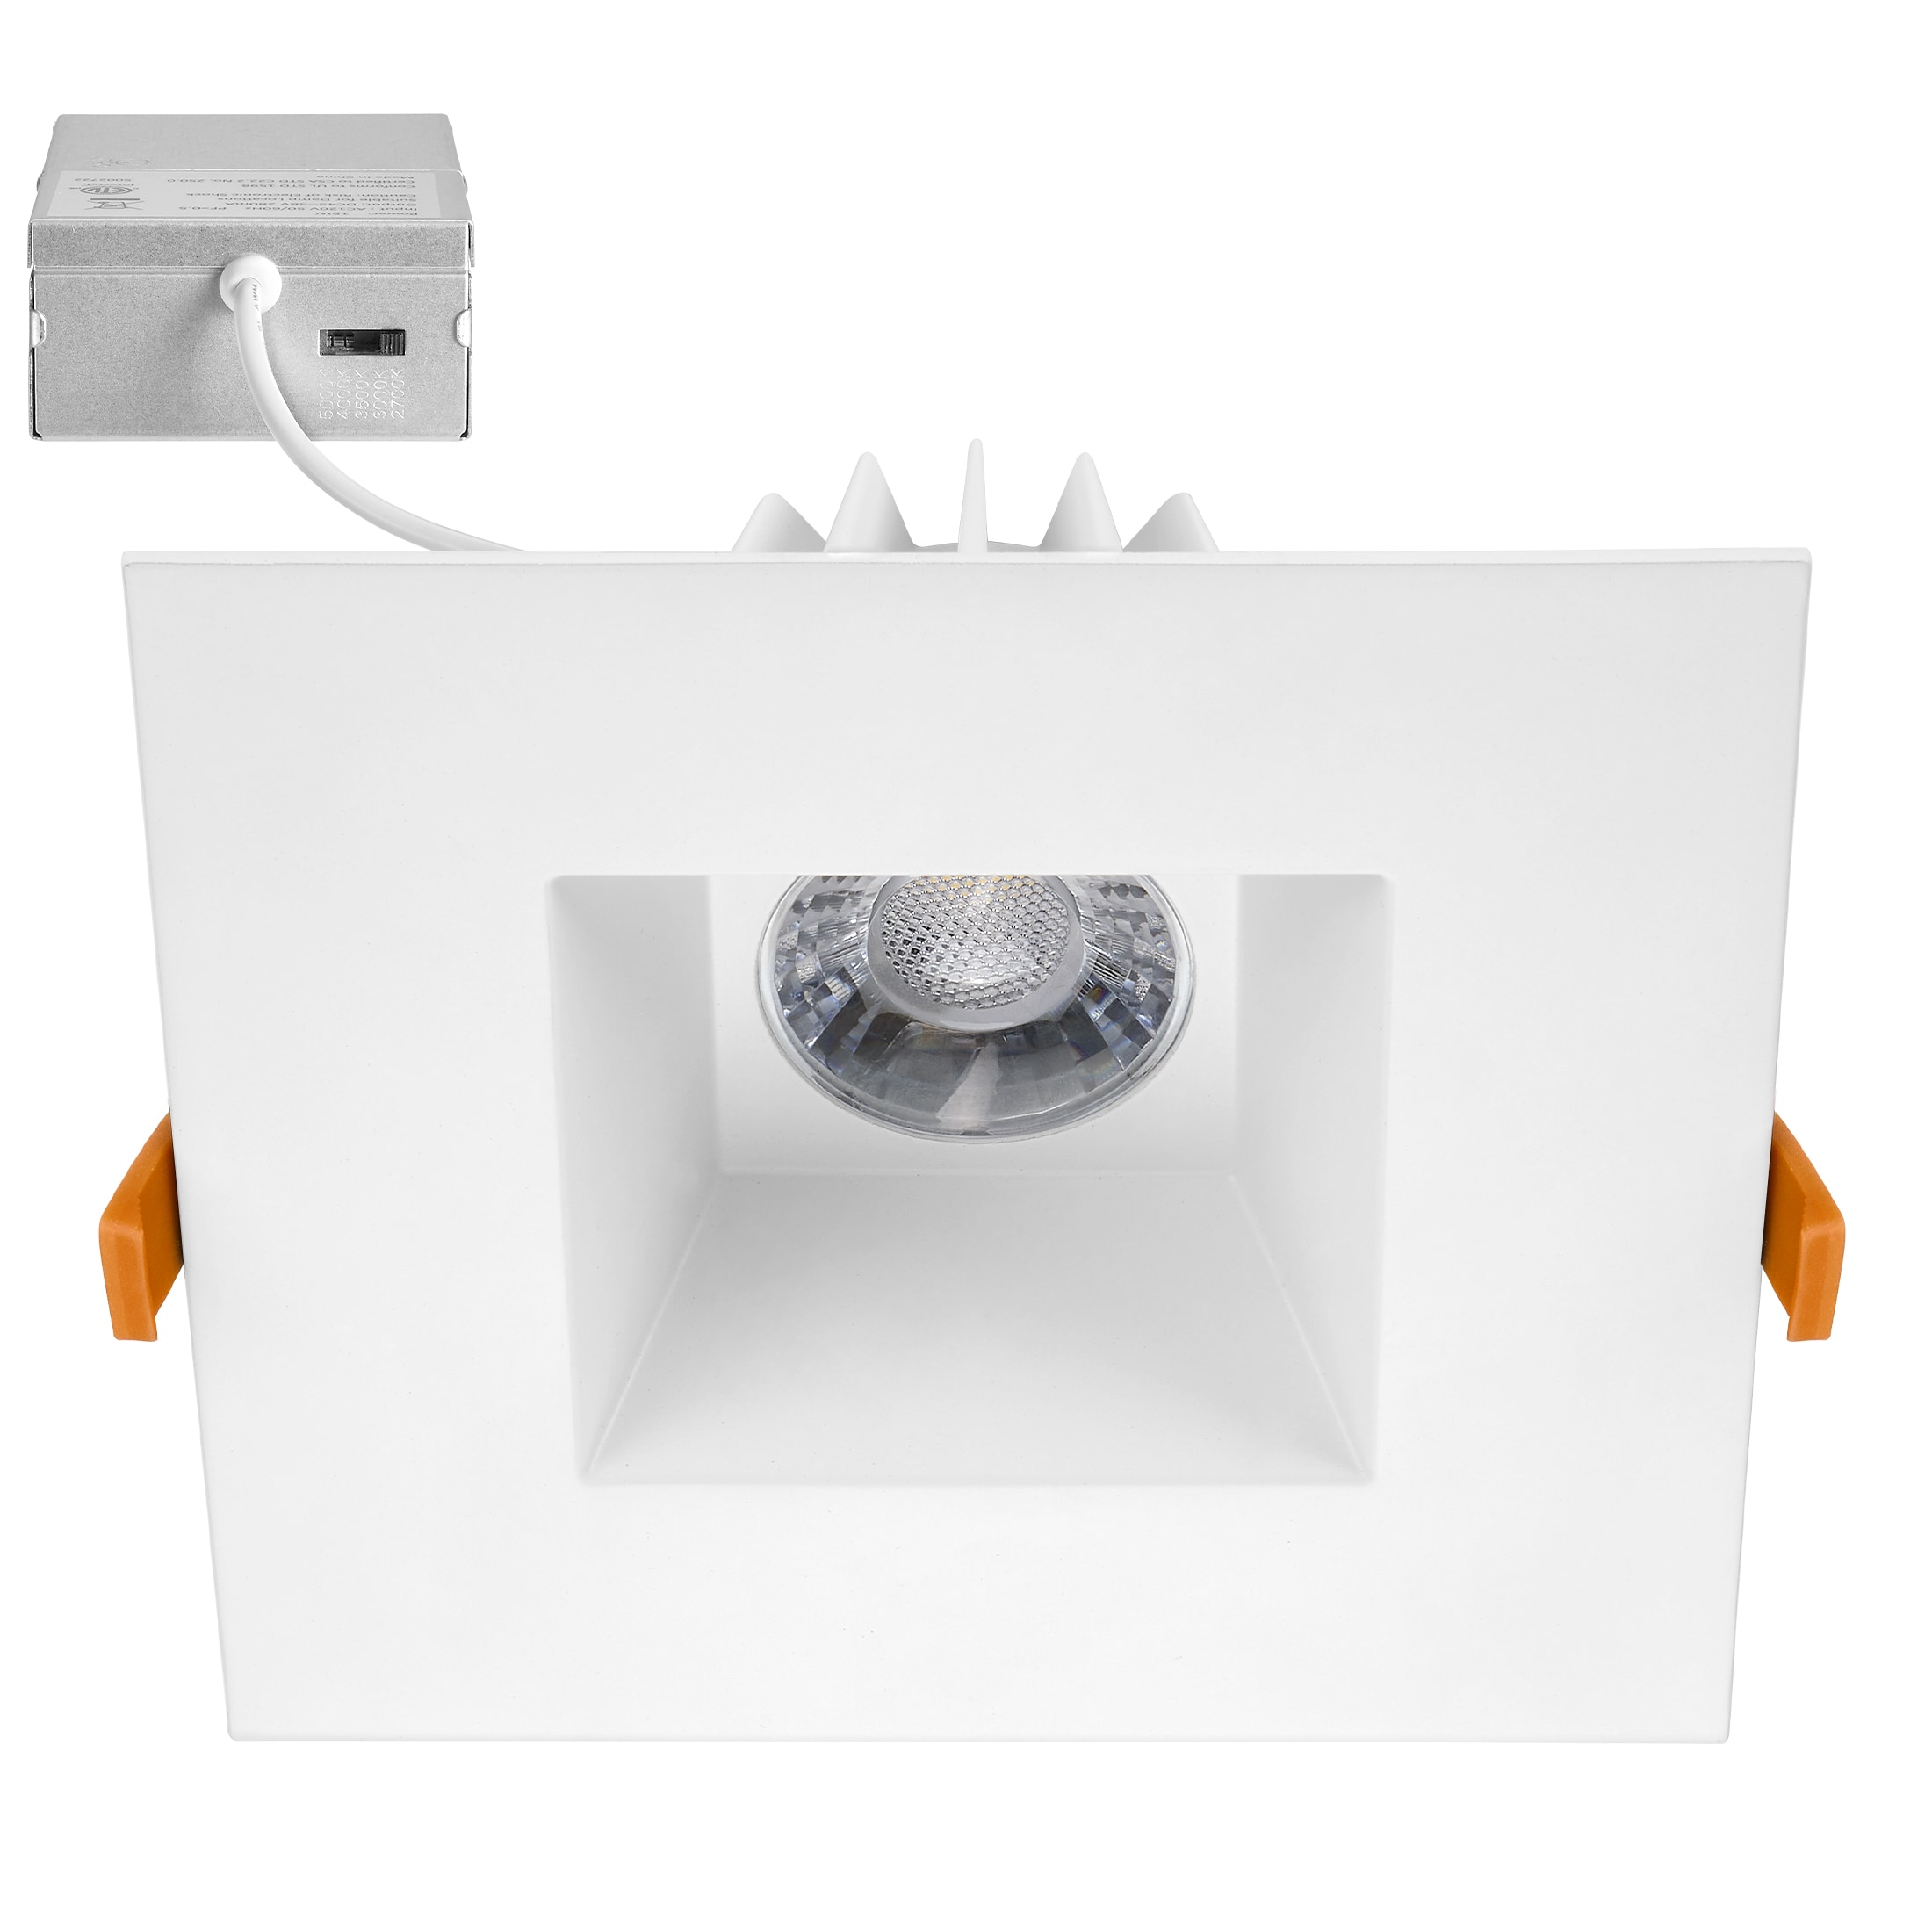 Maxxima 4 in. 5CCT Ultra Thin Recessed LED Downlight - Color Temperature  Selectable 2700K/3000K/3500K/4000K/5000K, 700 Lumens, Dimmable Light  Fixture